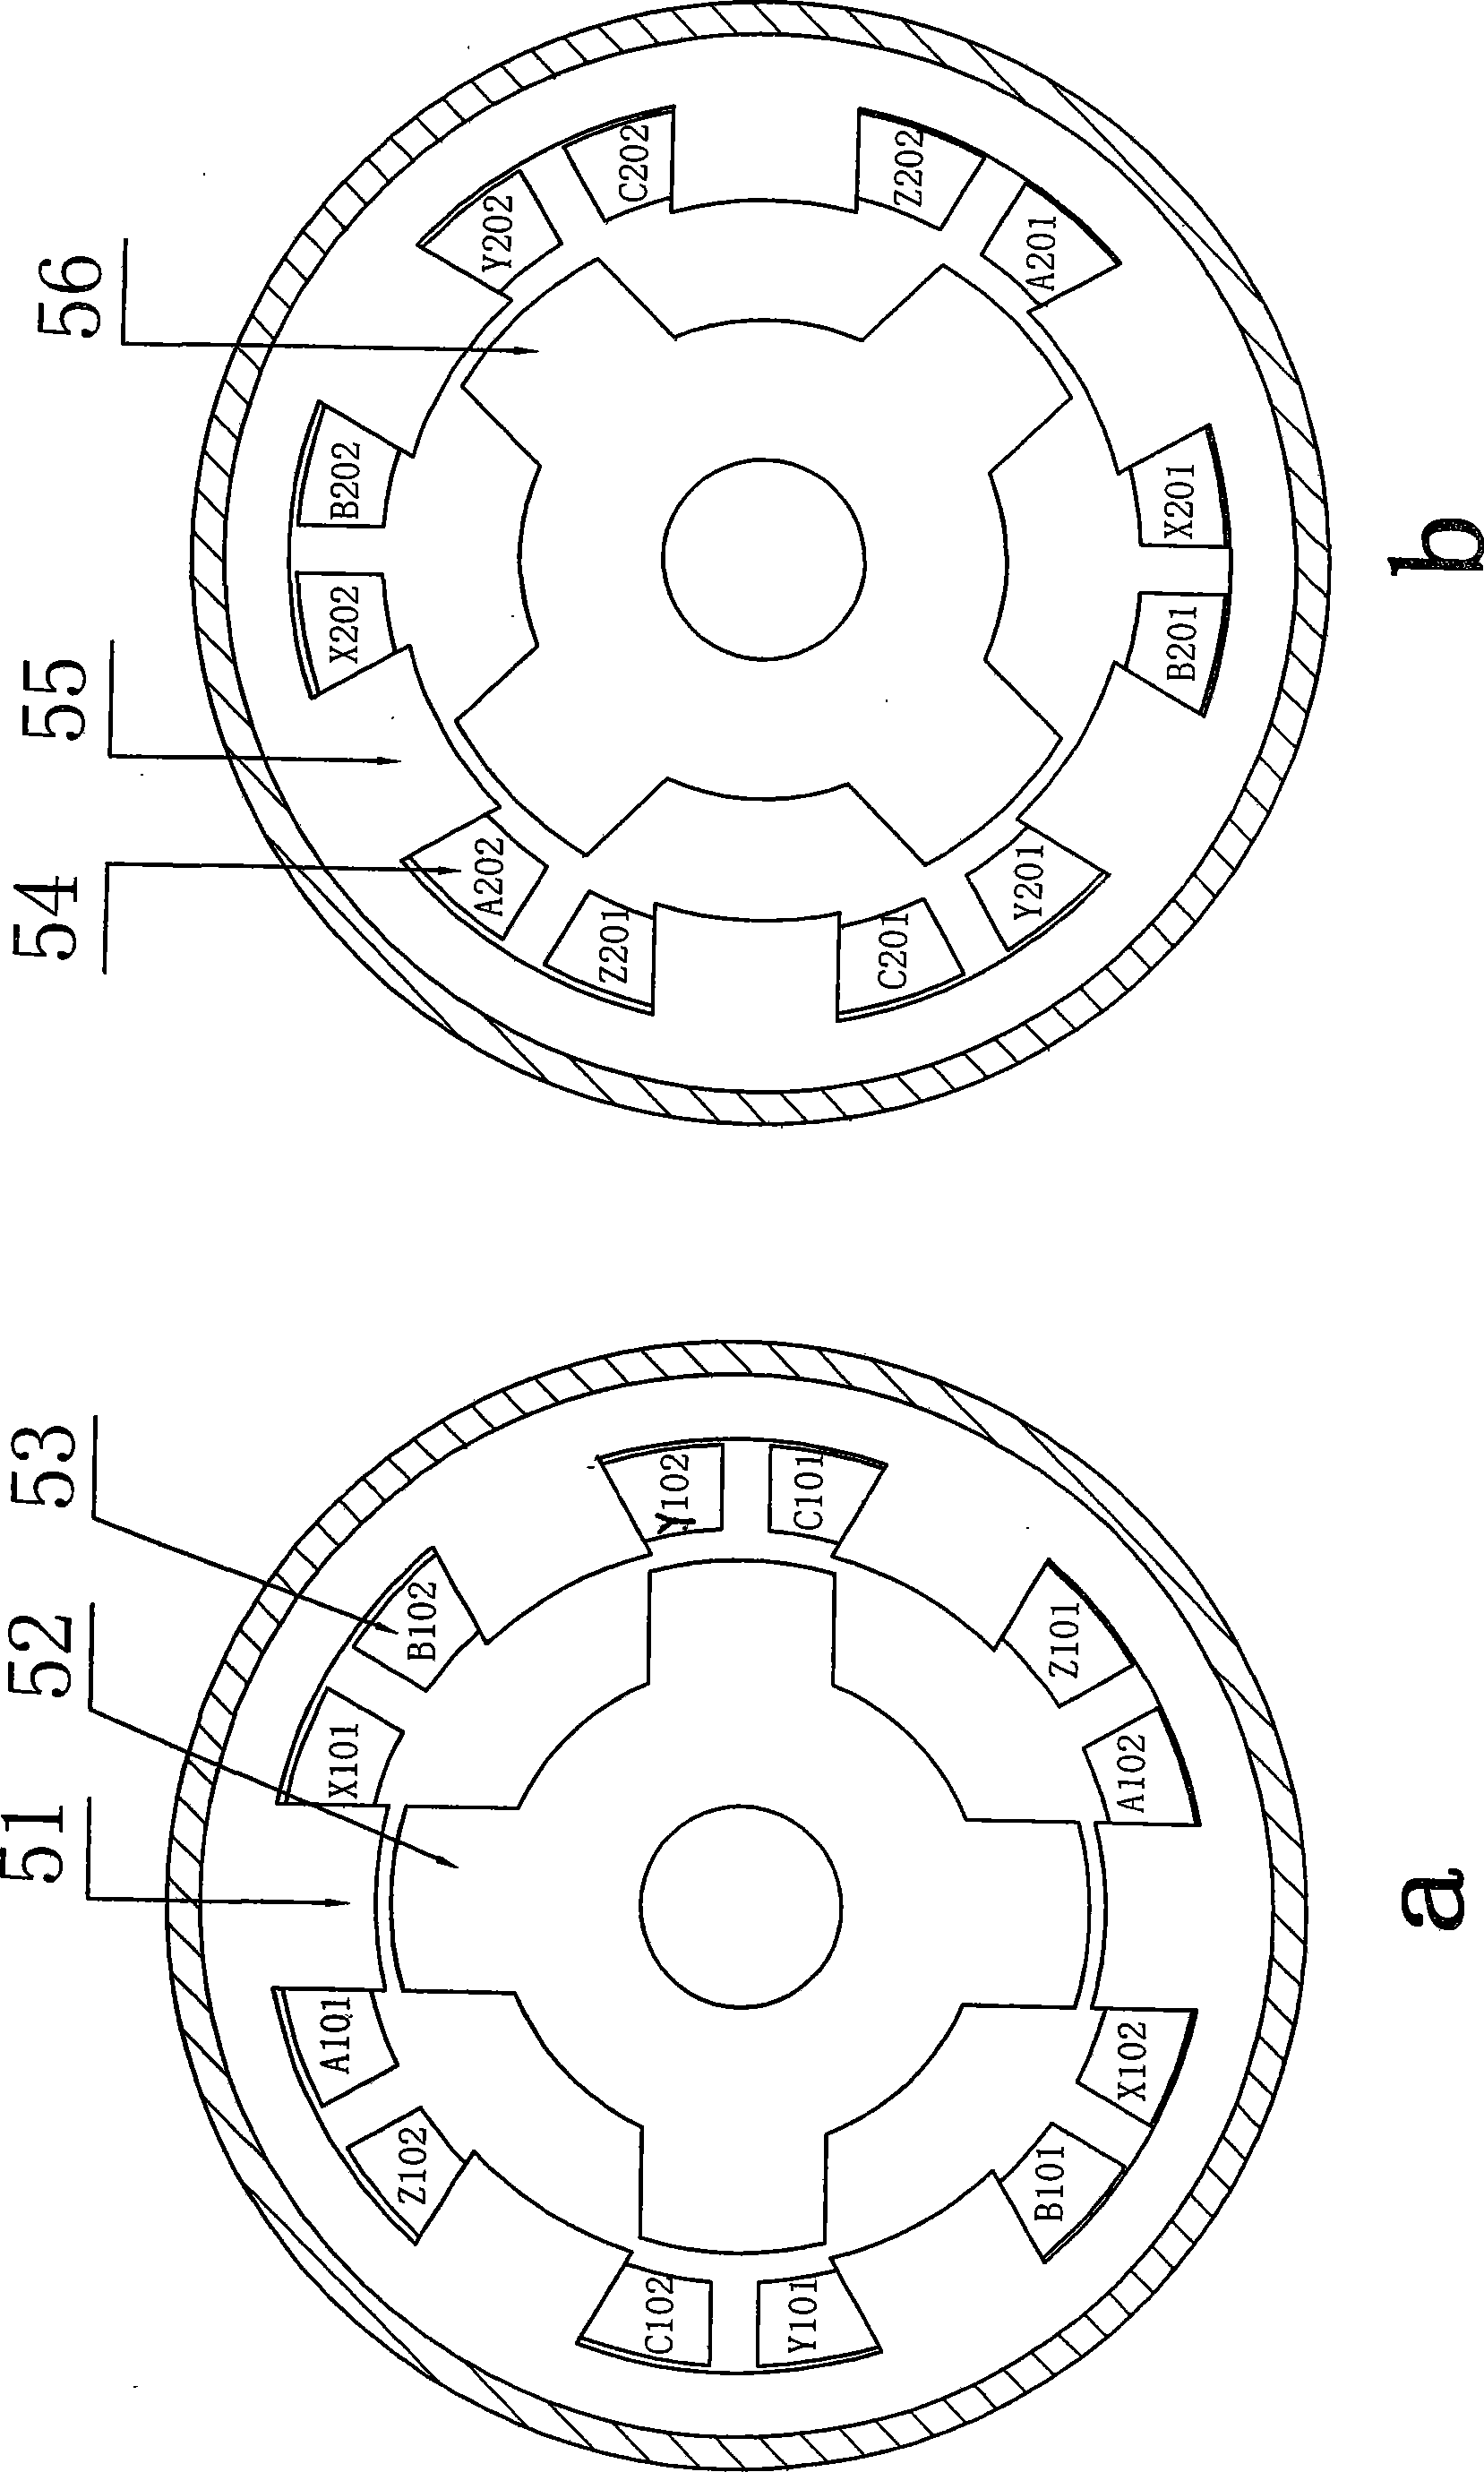 Switched reluctance motor with double stators and double rotors